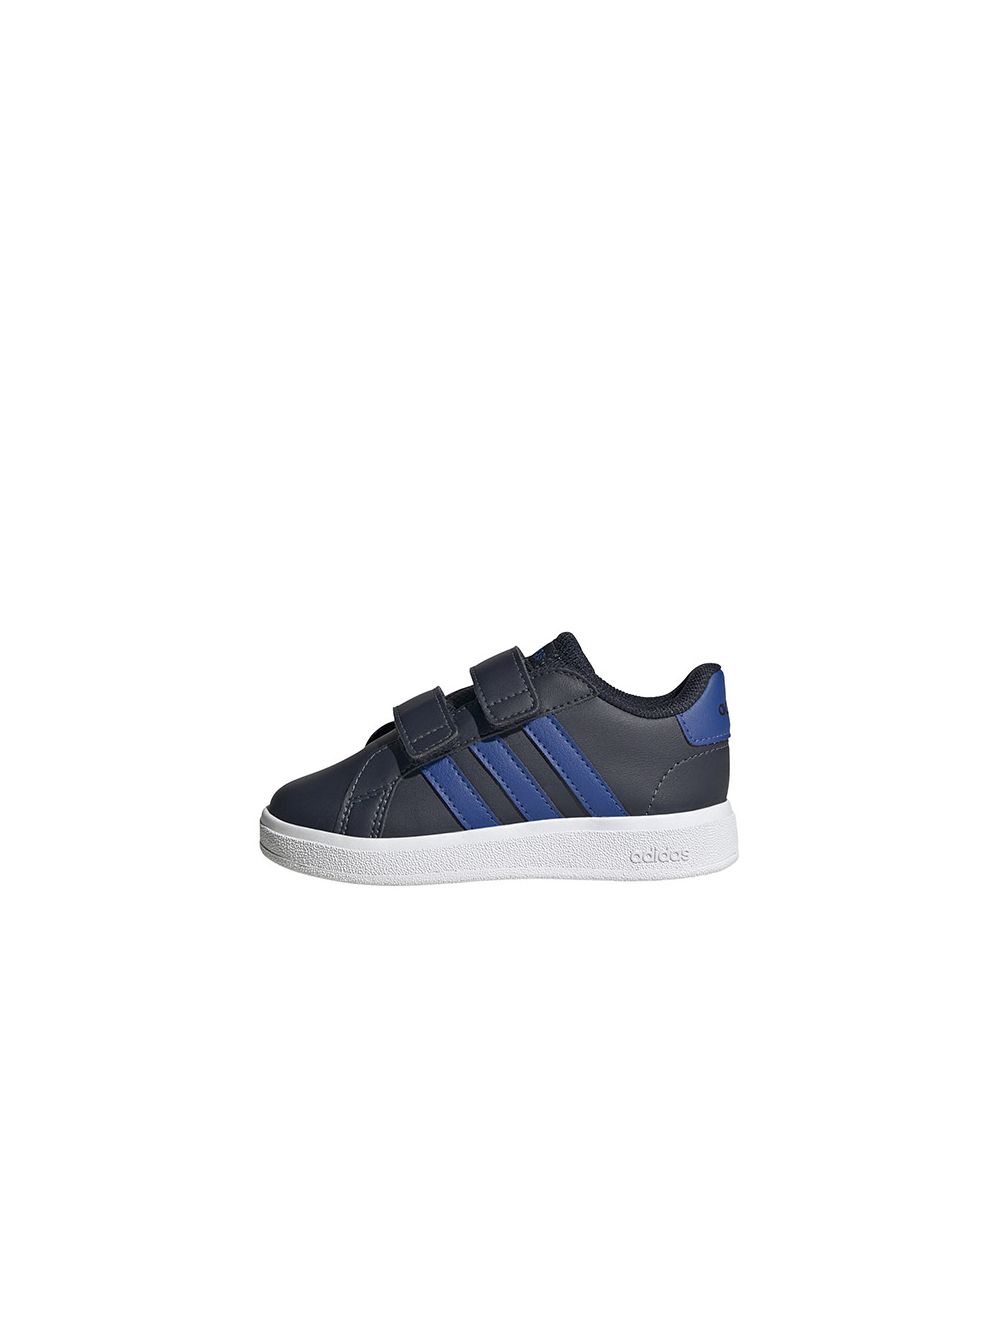 Shop adidas Performance Grand Court 2.0 Infants Shoes Royal/Navy